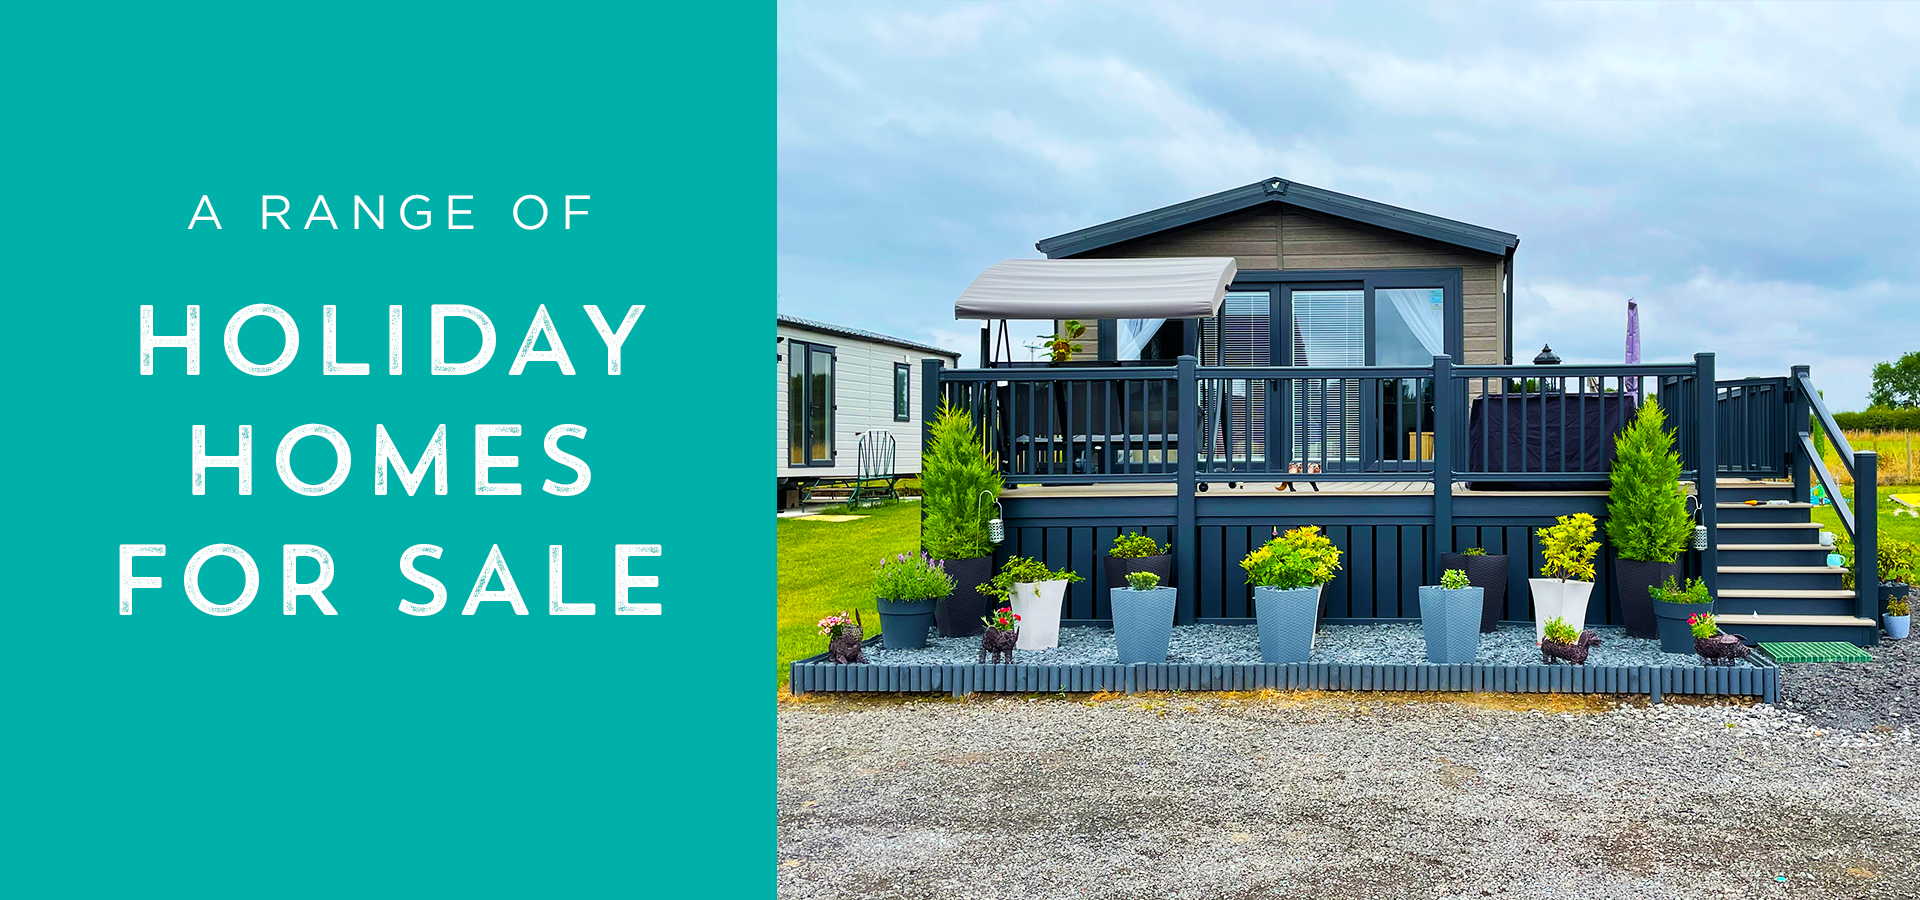 holiday homes for sale banner image